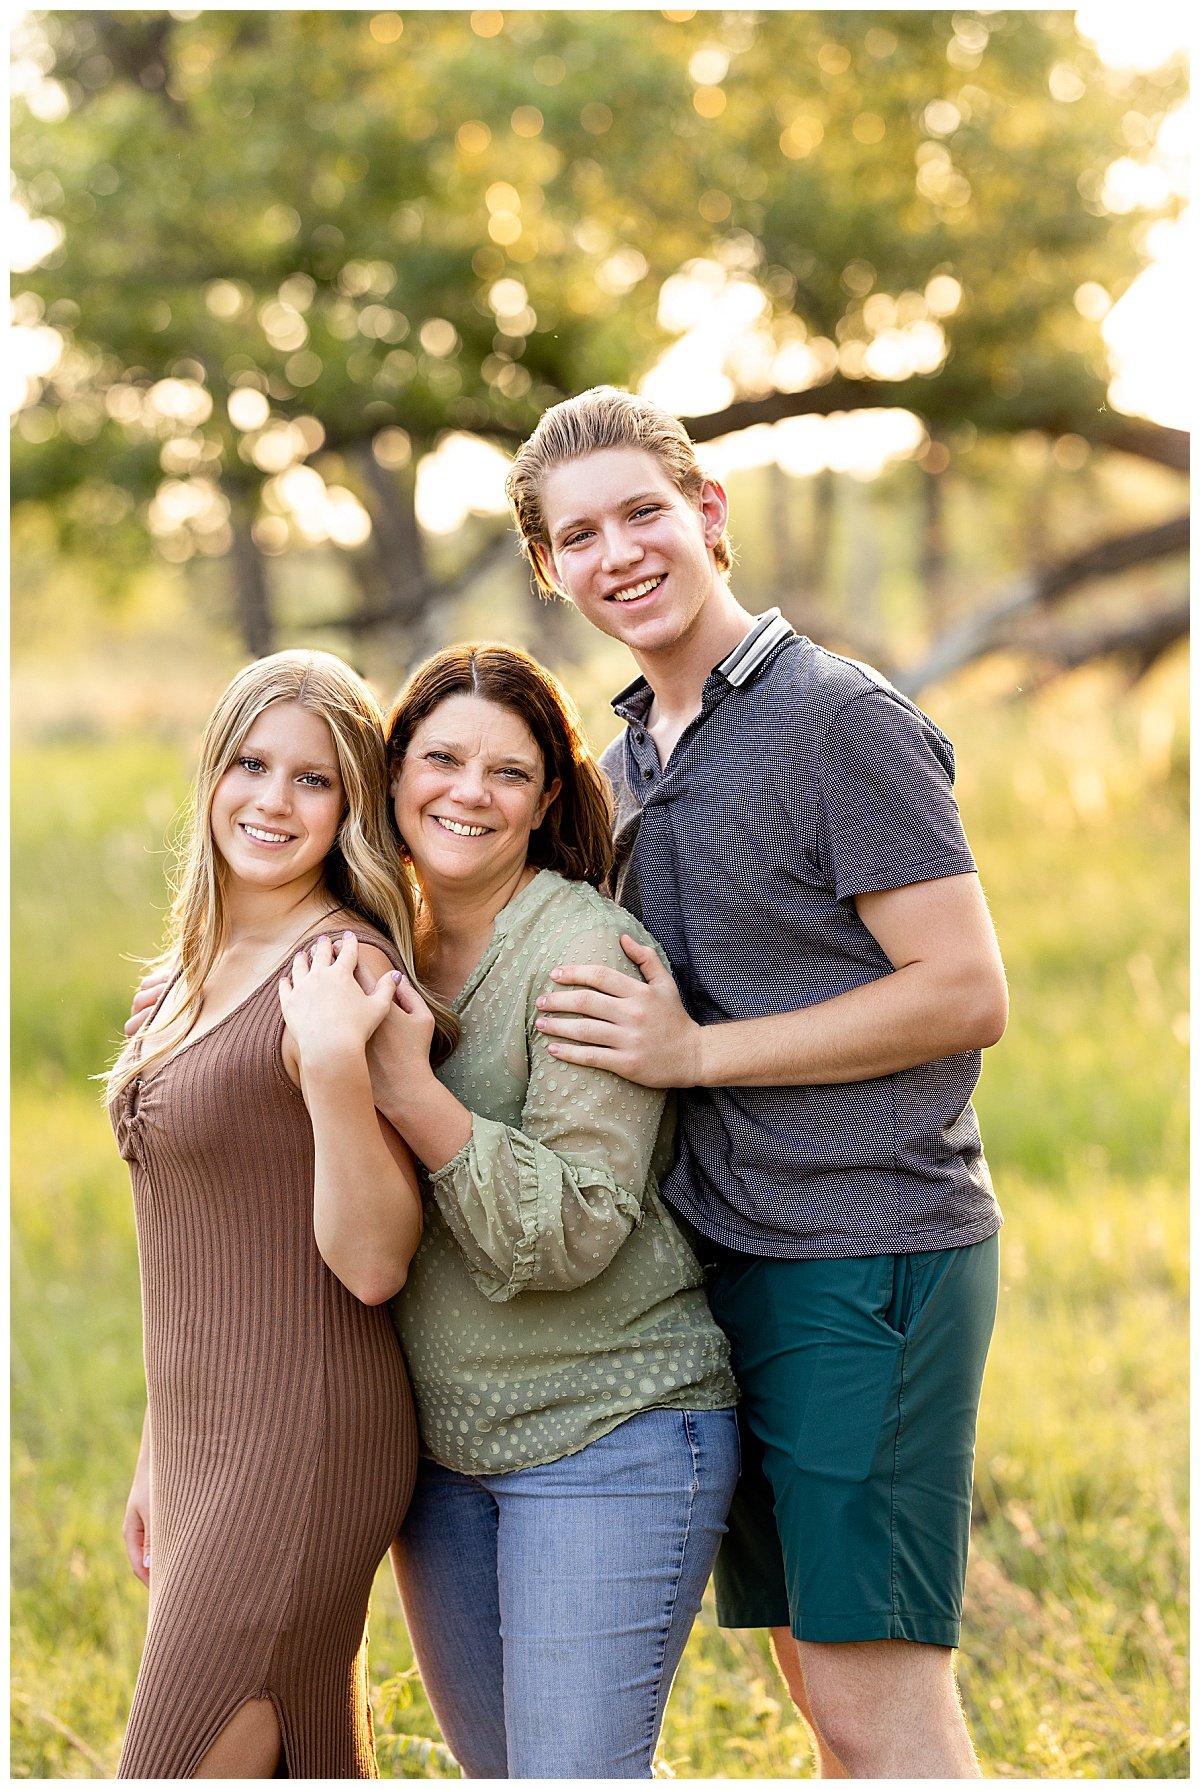 A senior girl poses with her mother and brother during a golden hour session